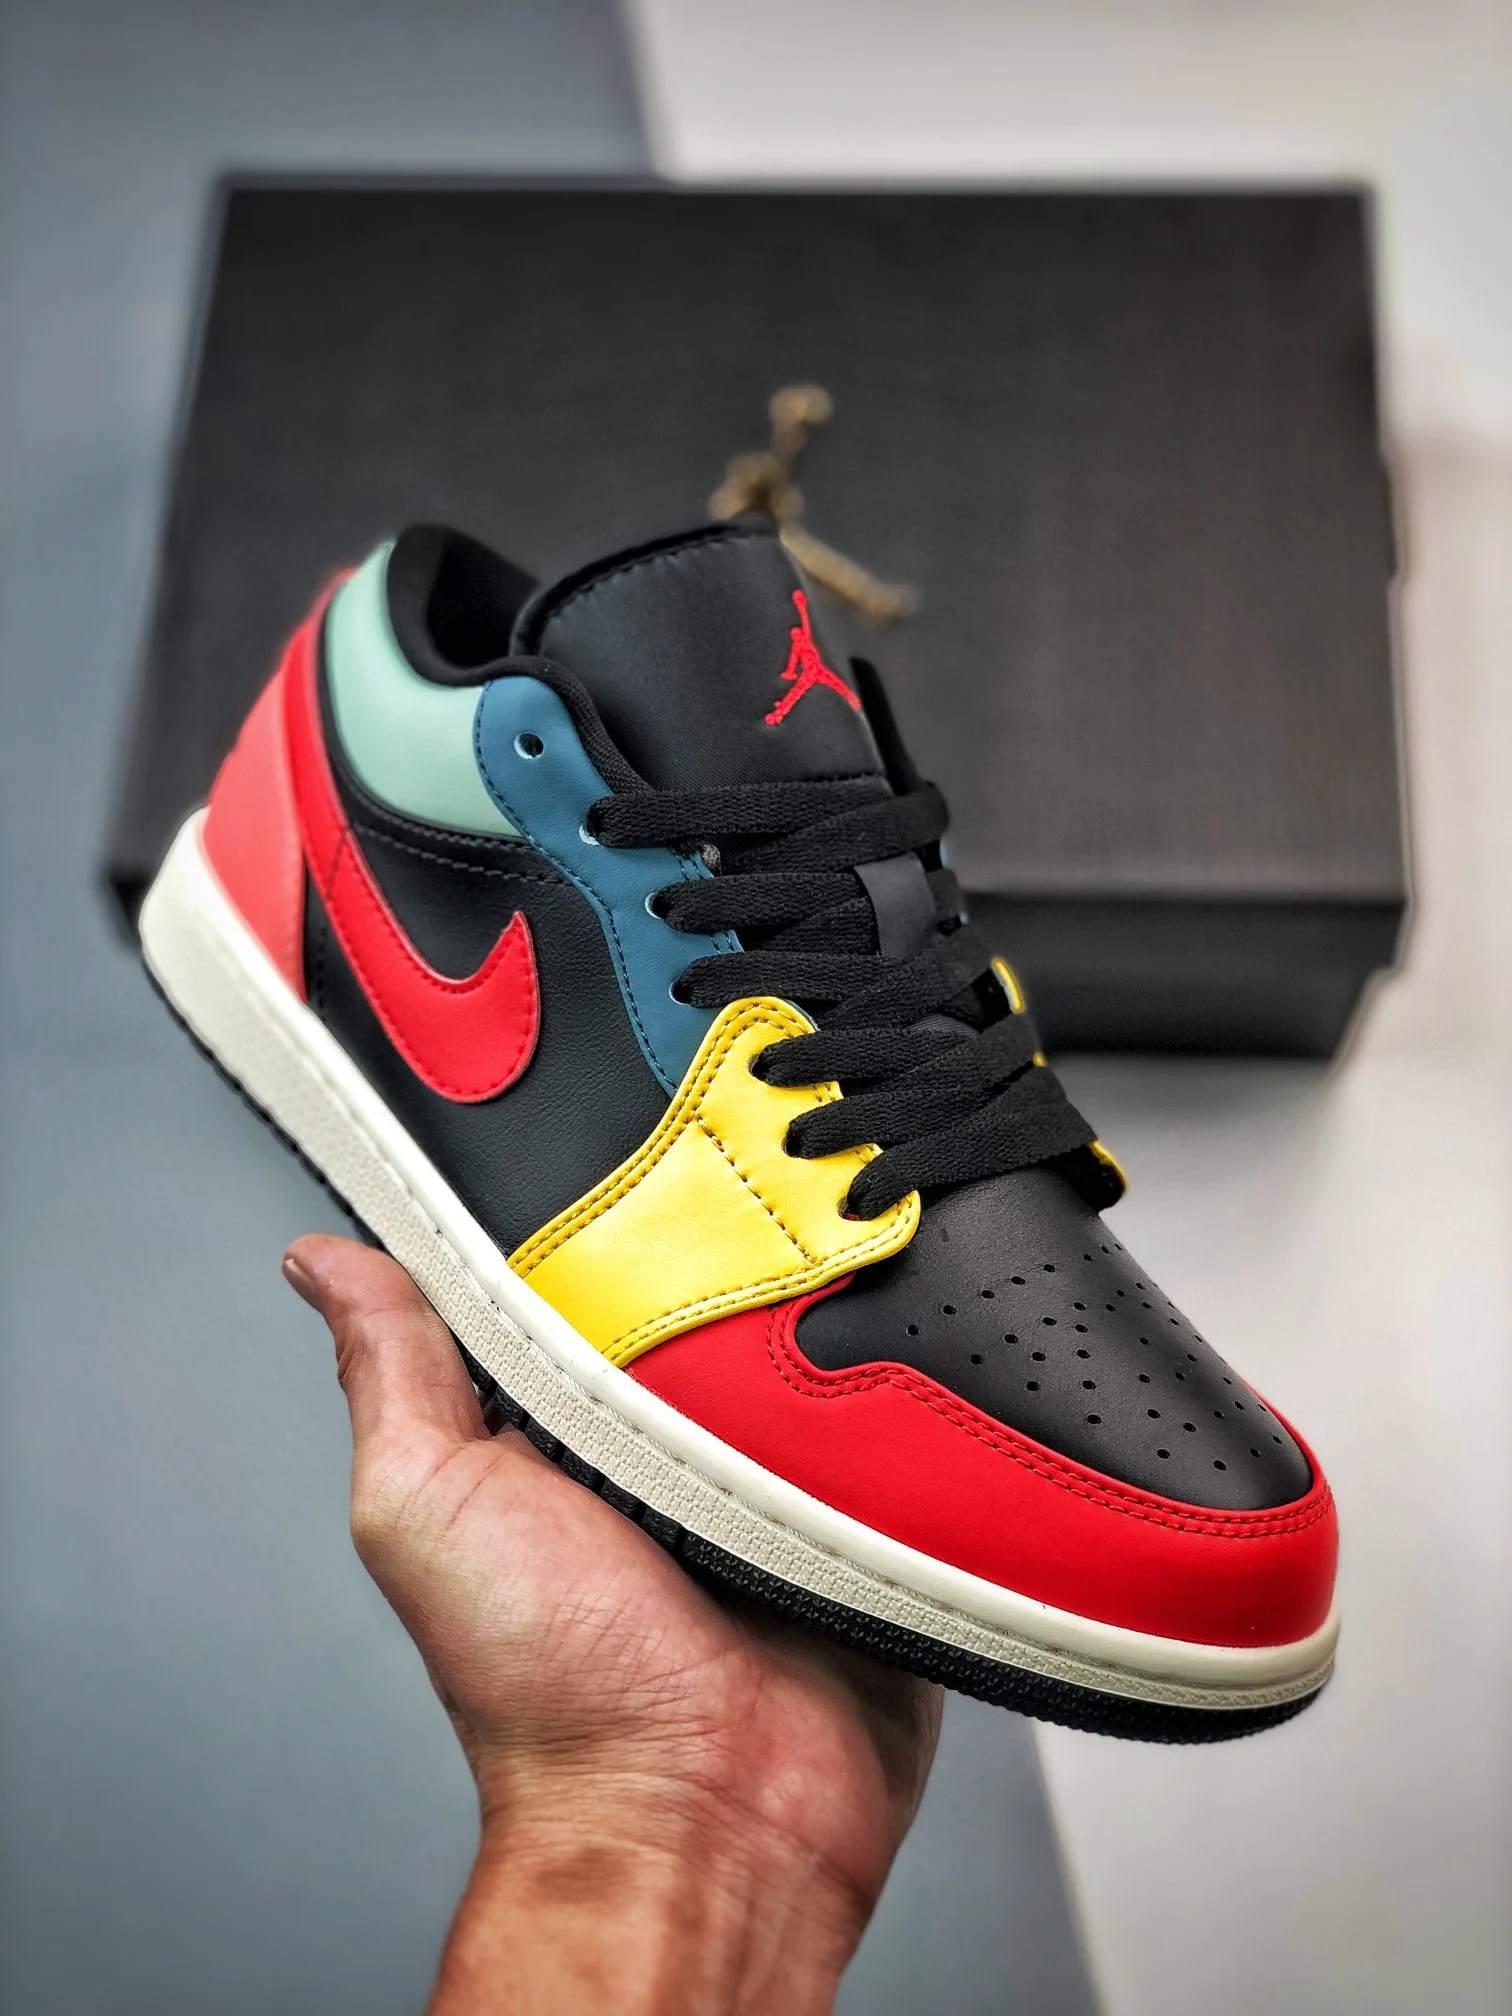 Air Jordan 1 Low SE Black Taxi French Blue Fire Red DN3739-060 For Sale